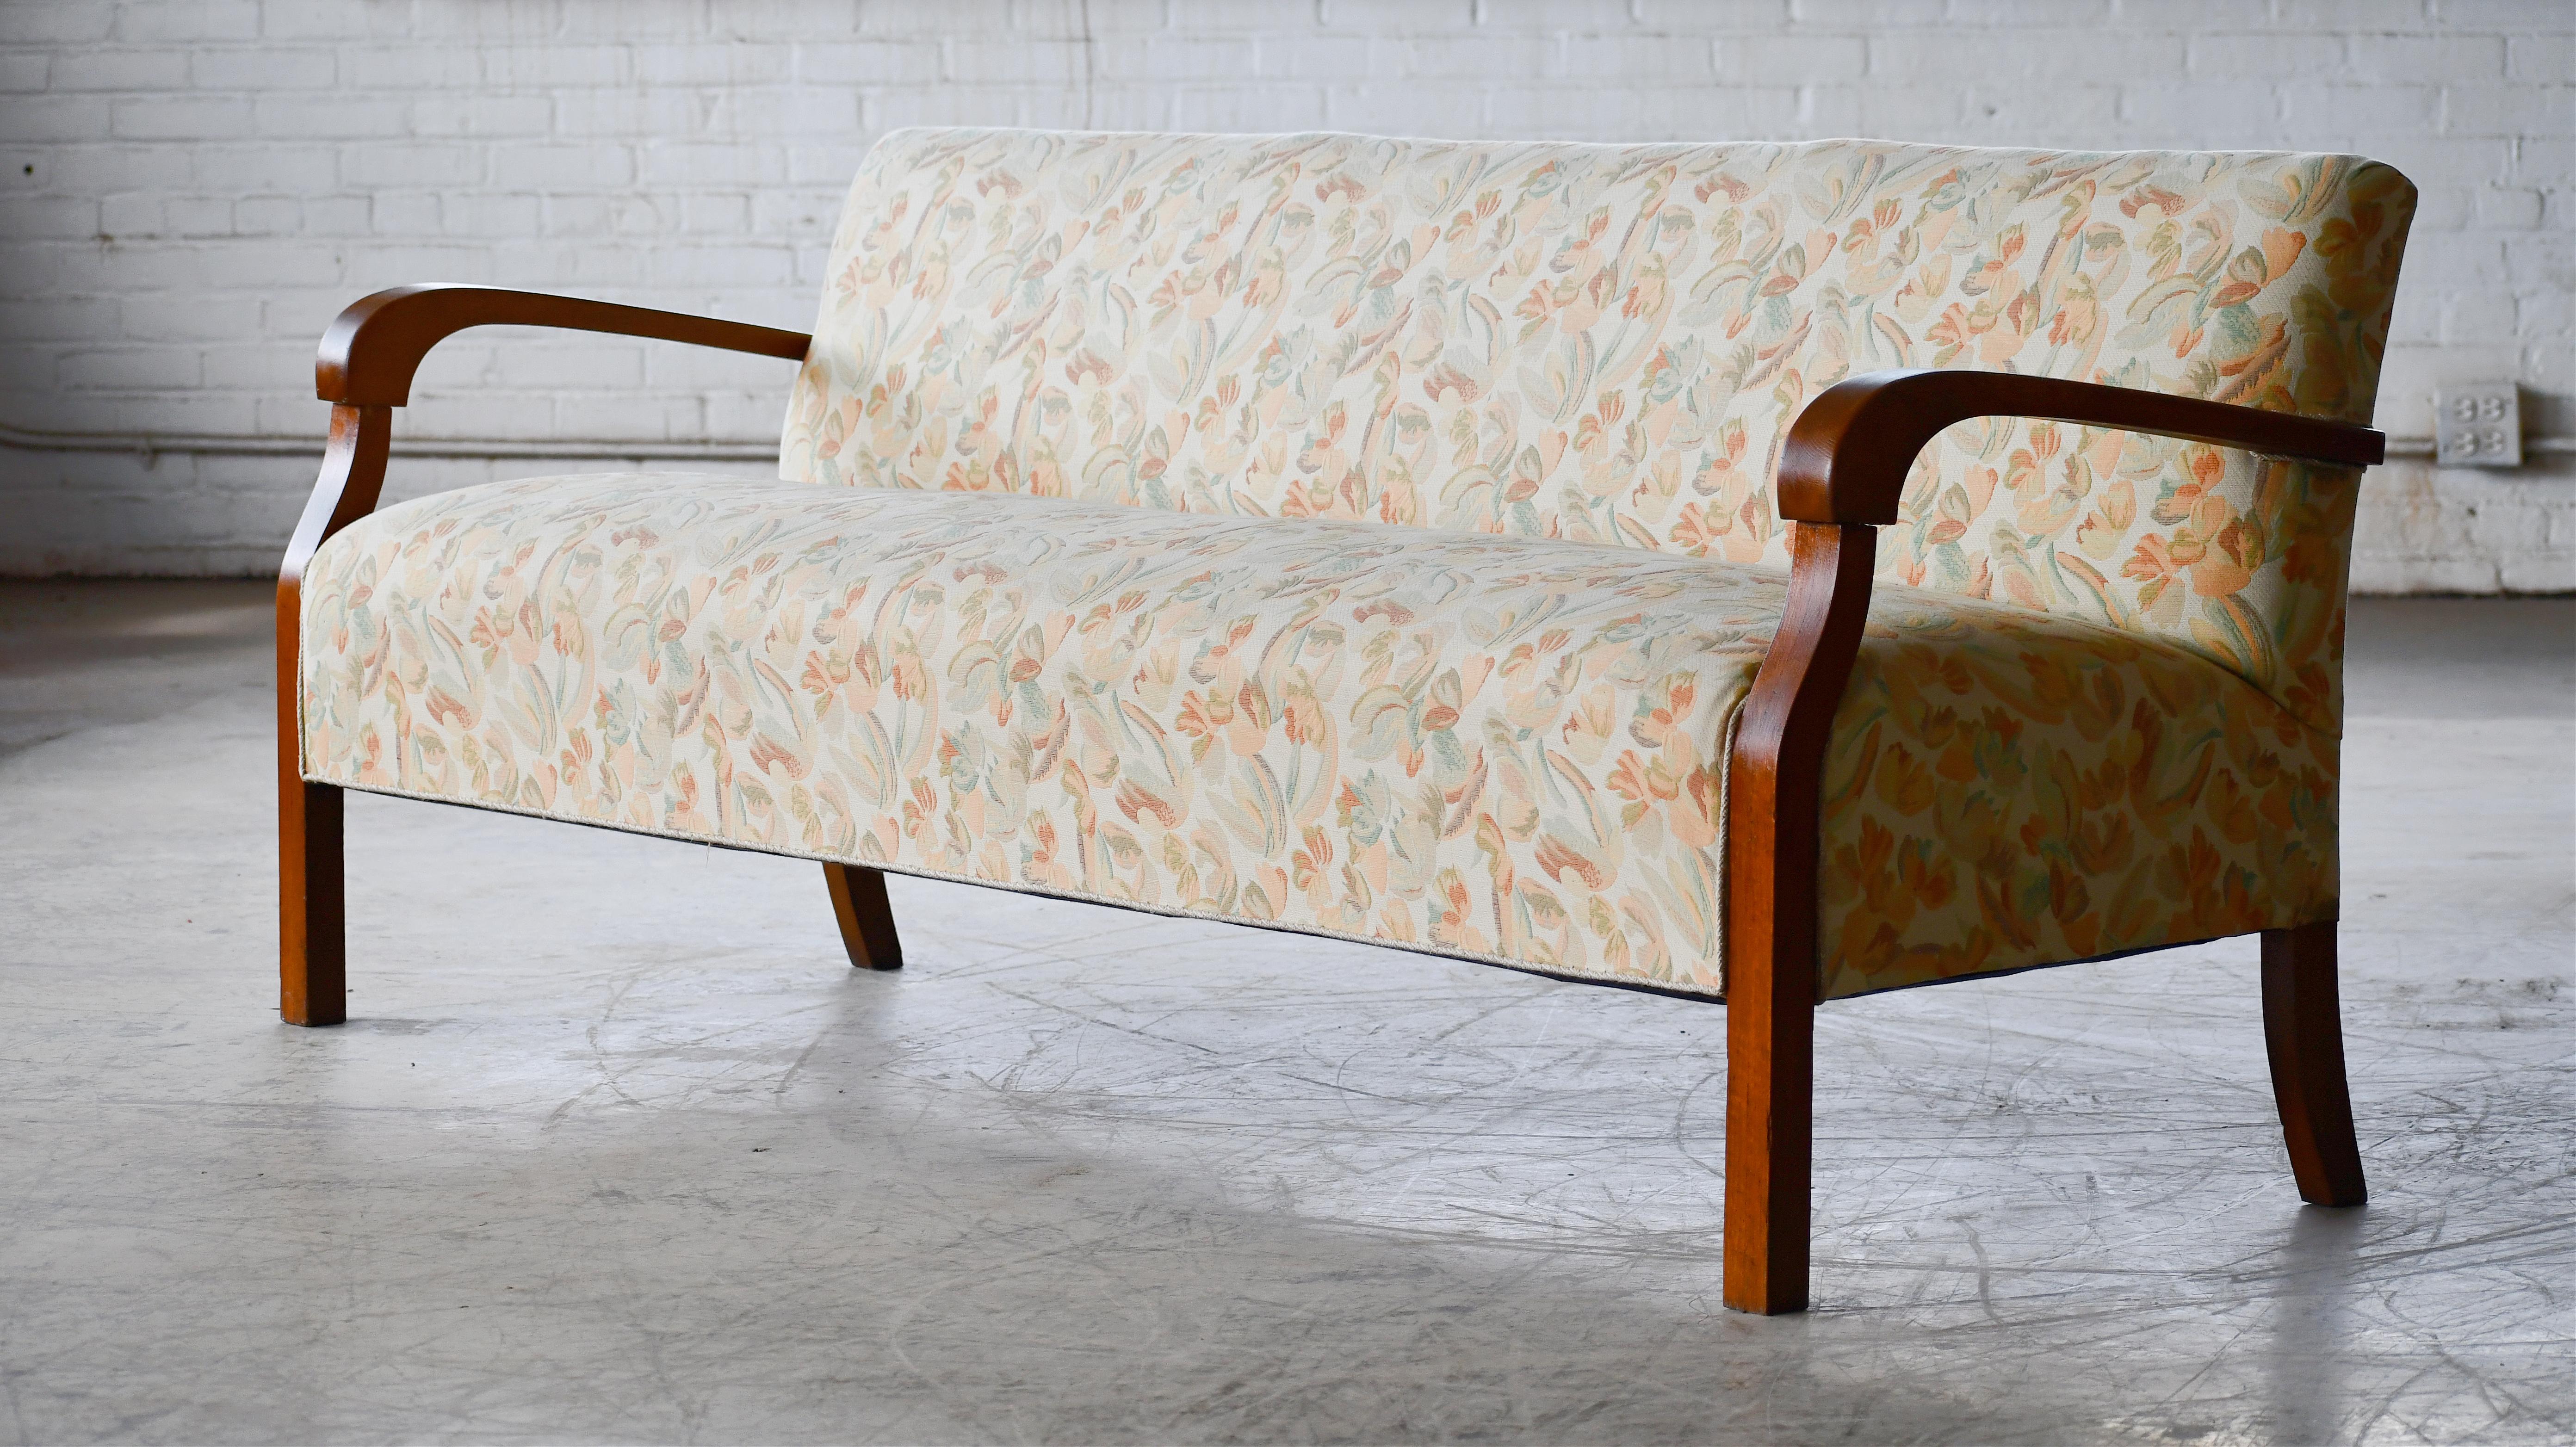 Superb Danish late Art Deco early midcentury sofa from the late 1930's or early 1940s with spring cushions and beautiful open armrests and legs carved in solid stained beech with great grain and patina. We just love the simple yet very refined